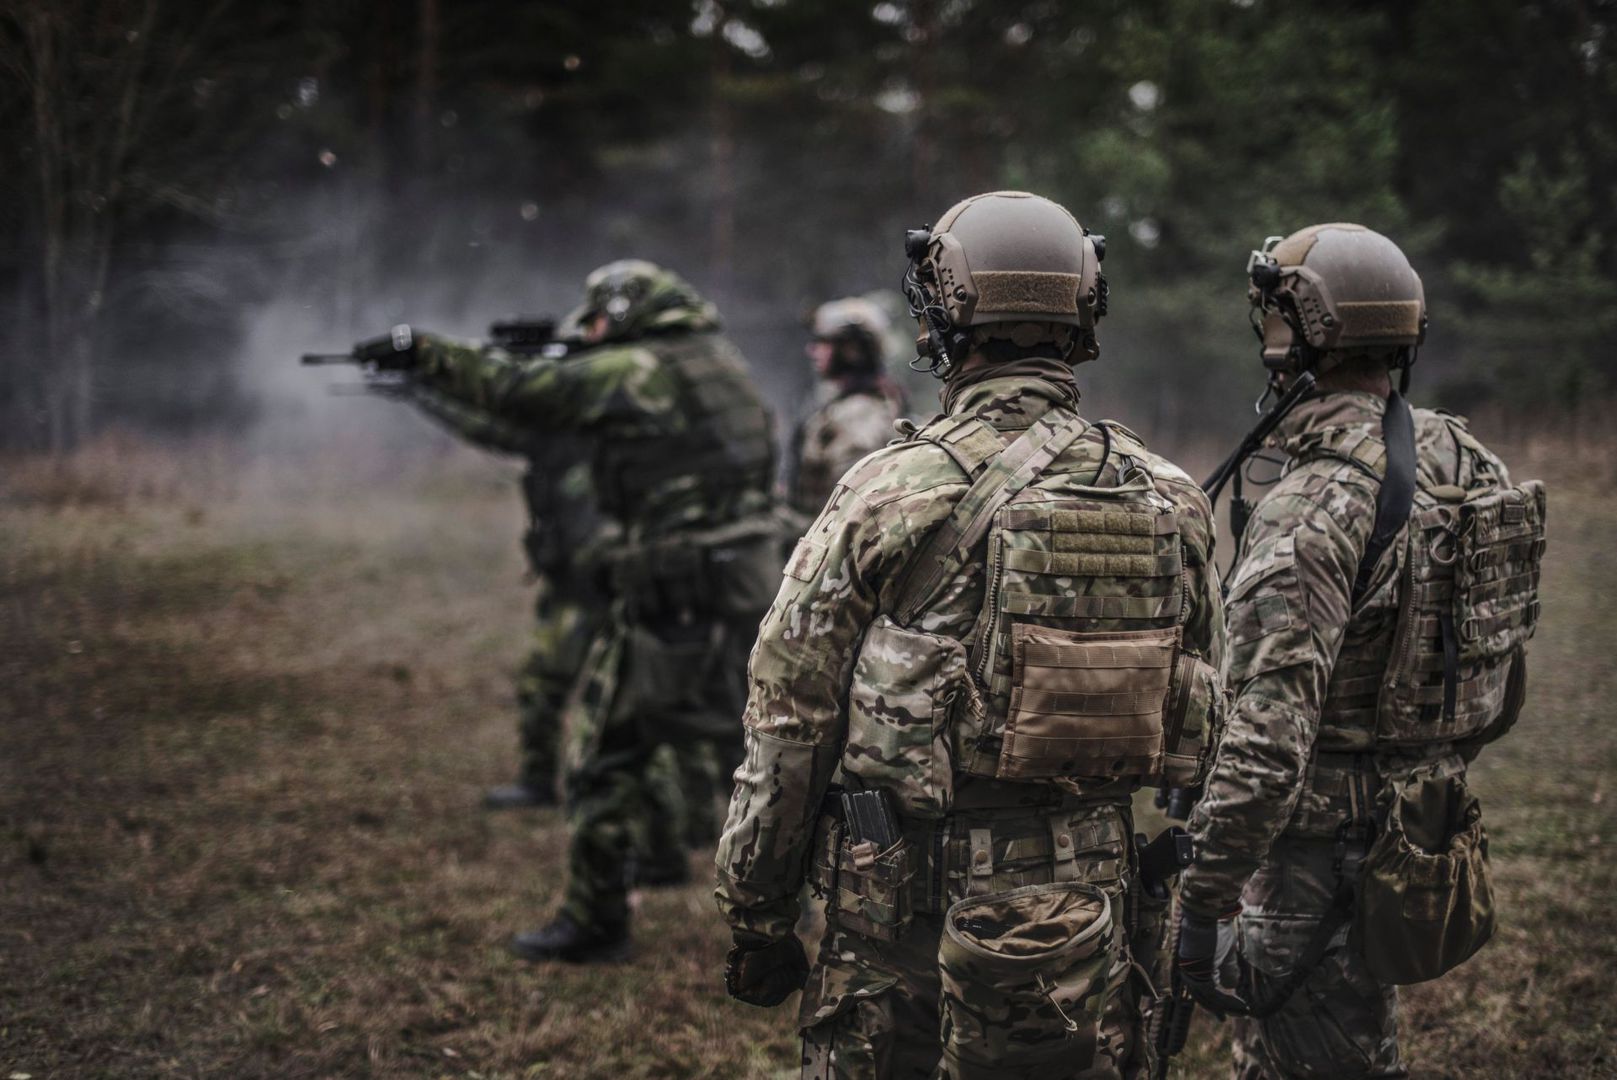 Swedish Special Forces